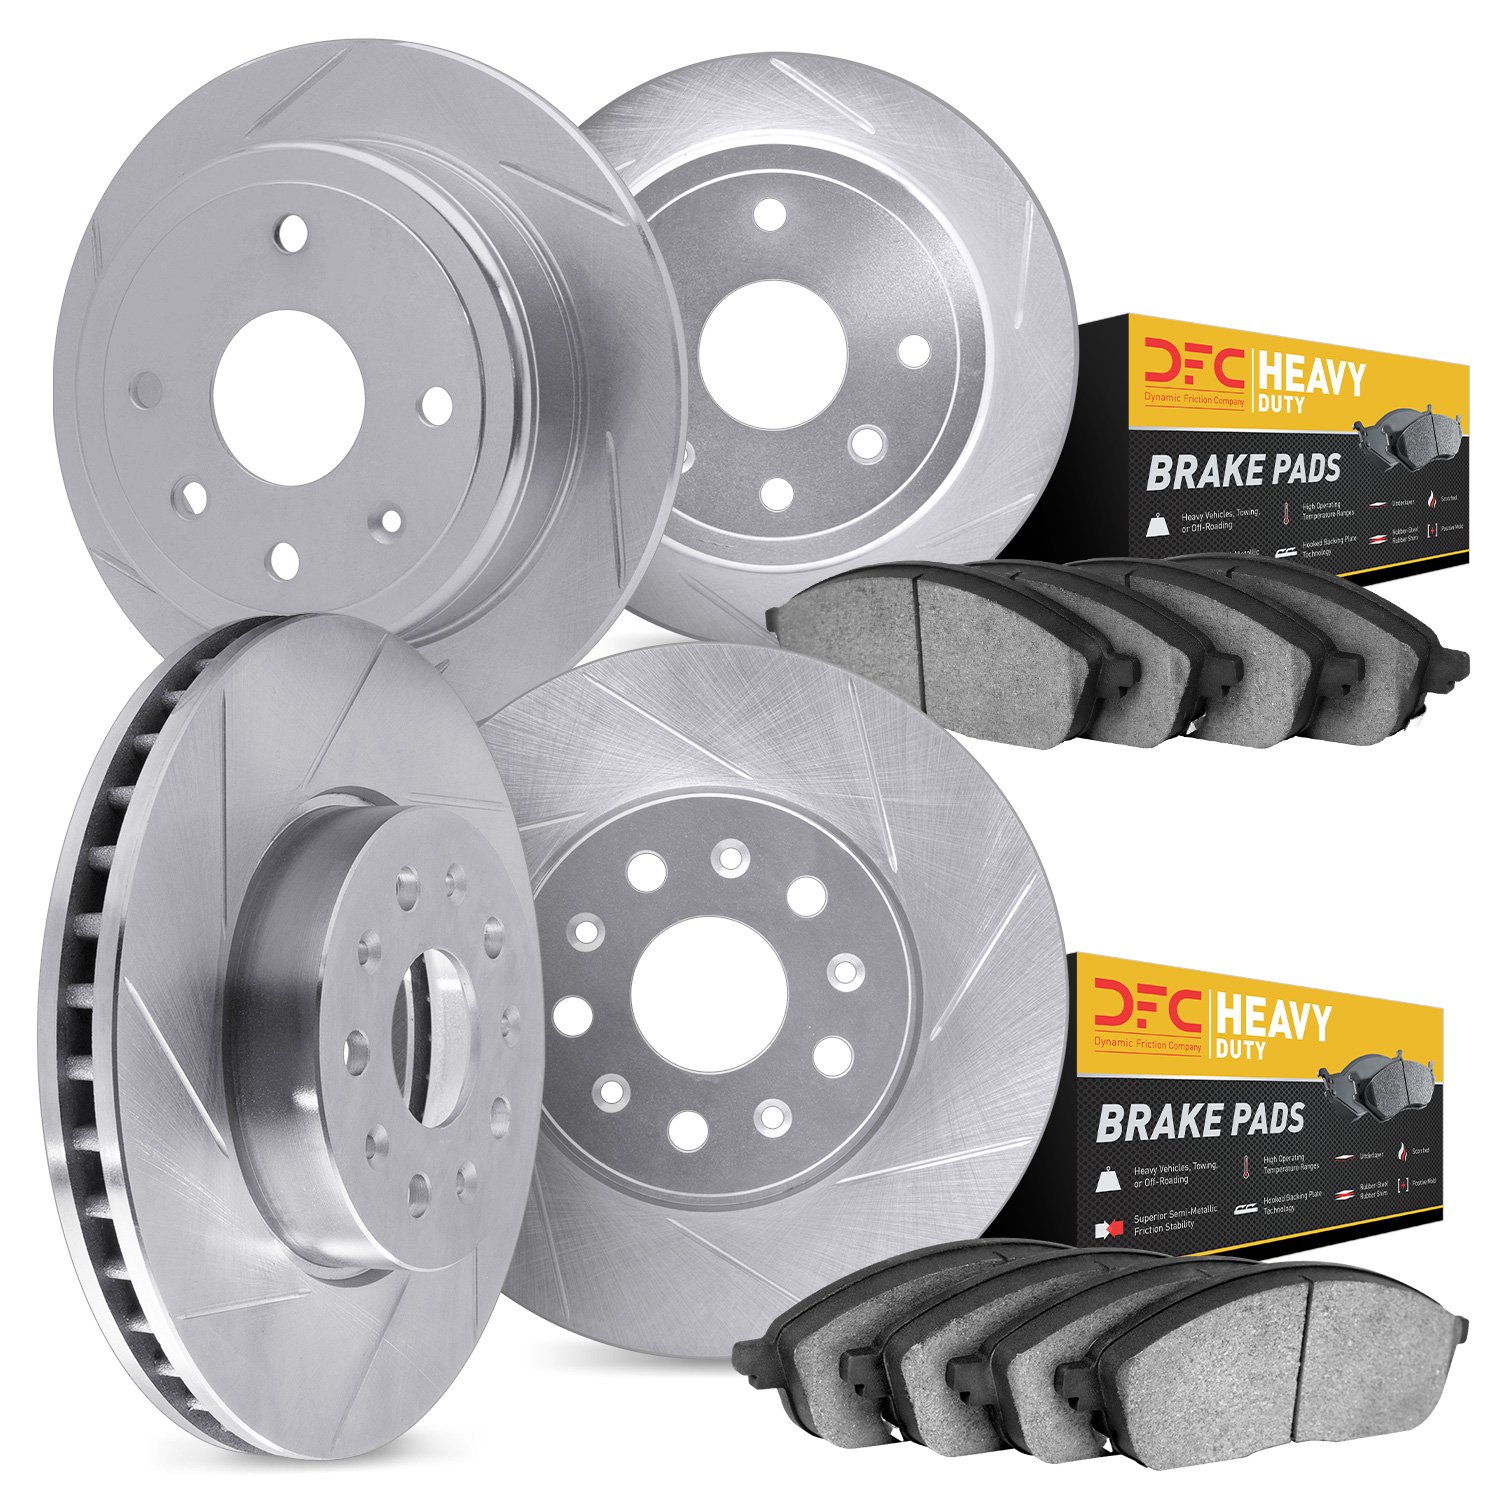 5204-42056 Slotted Brake Rotors w/Heavy-Duty Brake Pads Kits [Silver], 1999-2002 Mopar, Position: Front and Rear